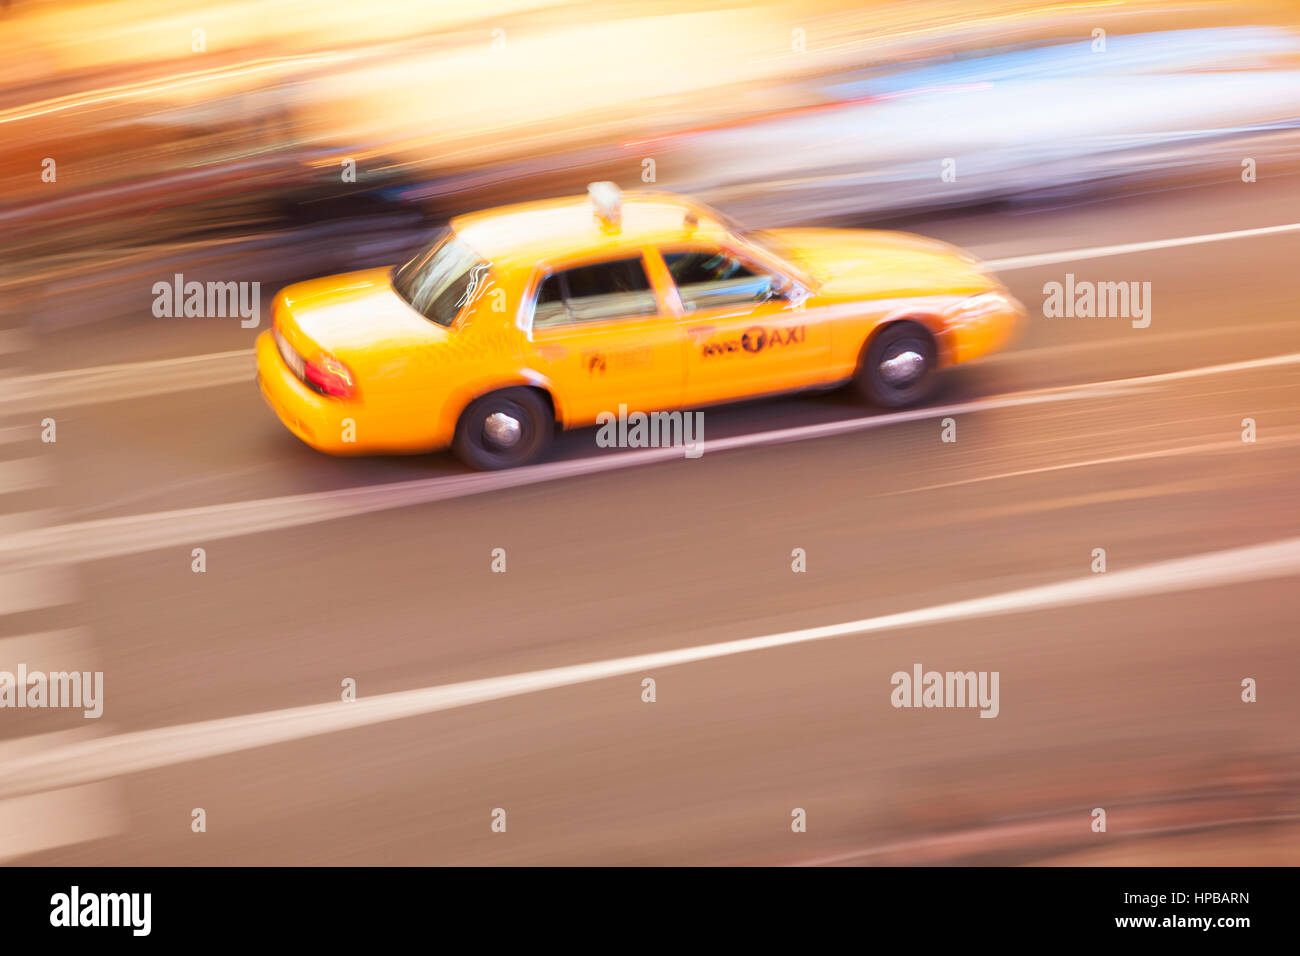 Yellow taxi Cab, Times Square, New York city, New York, USA. Stock Photo